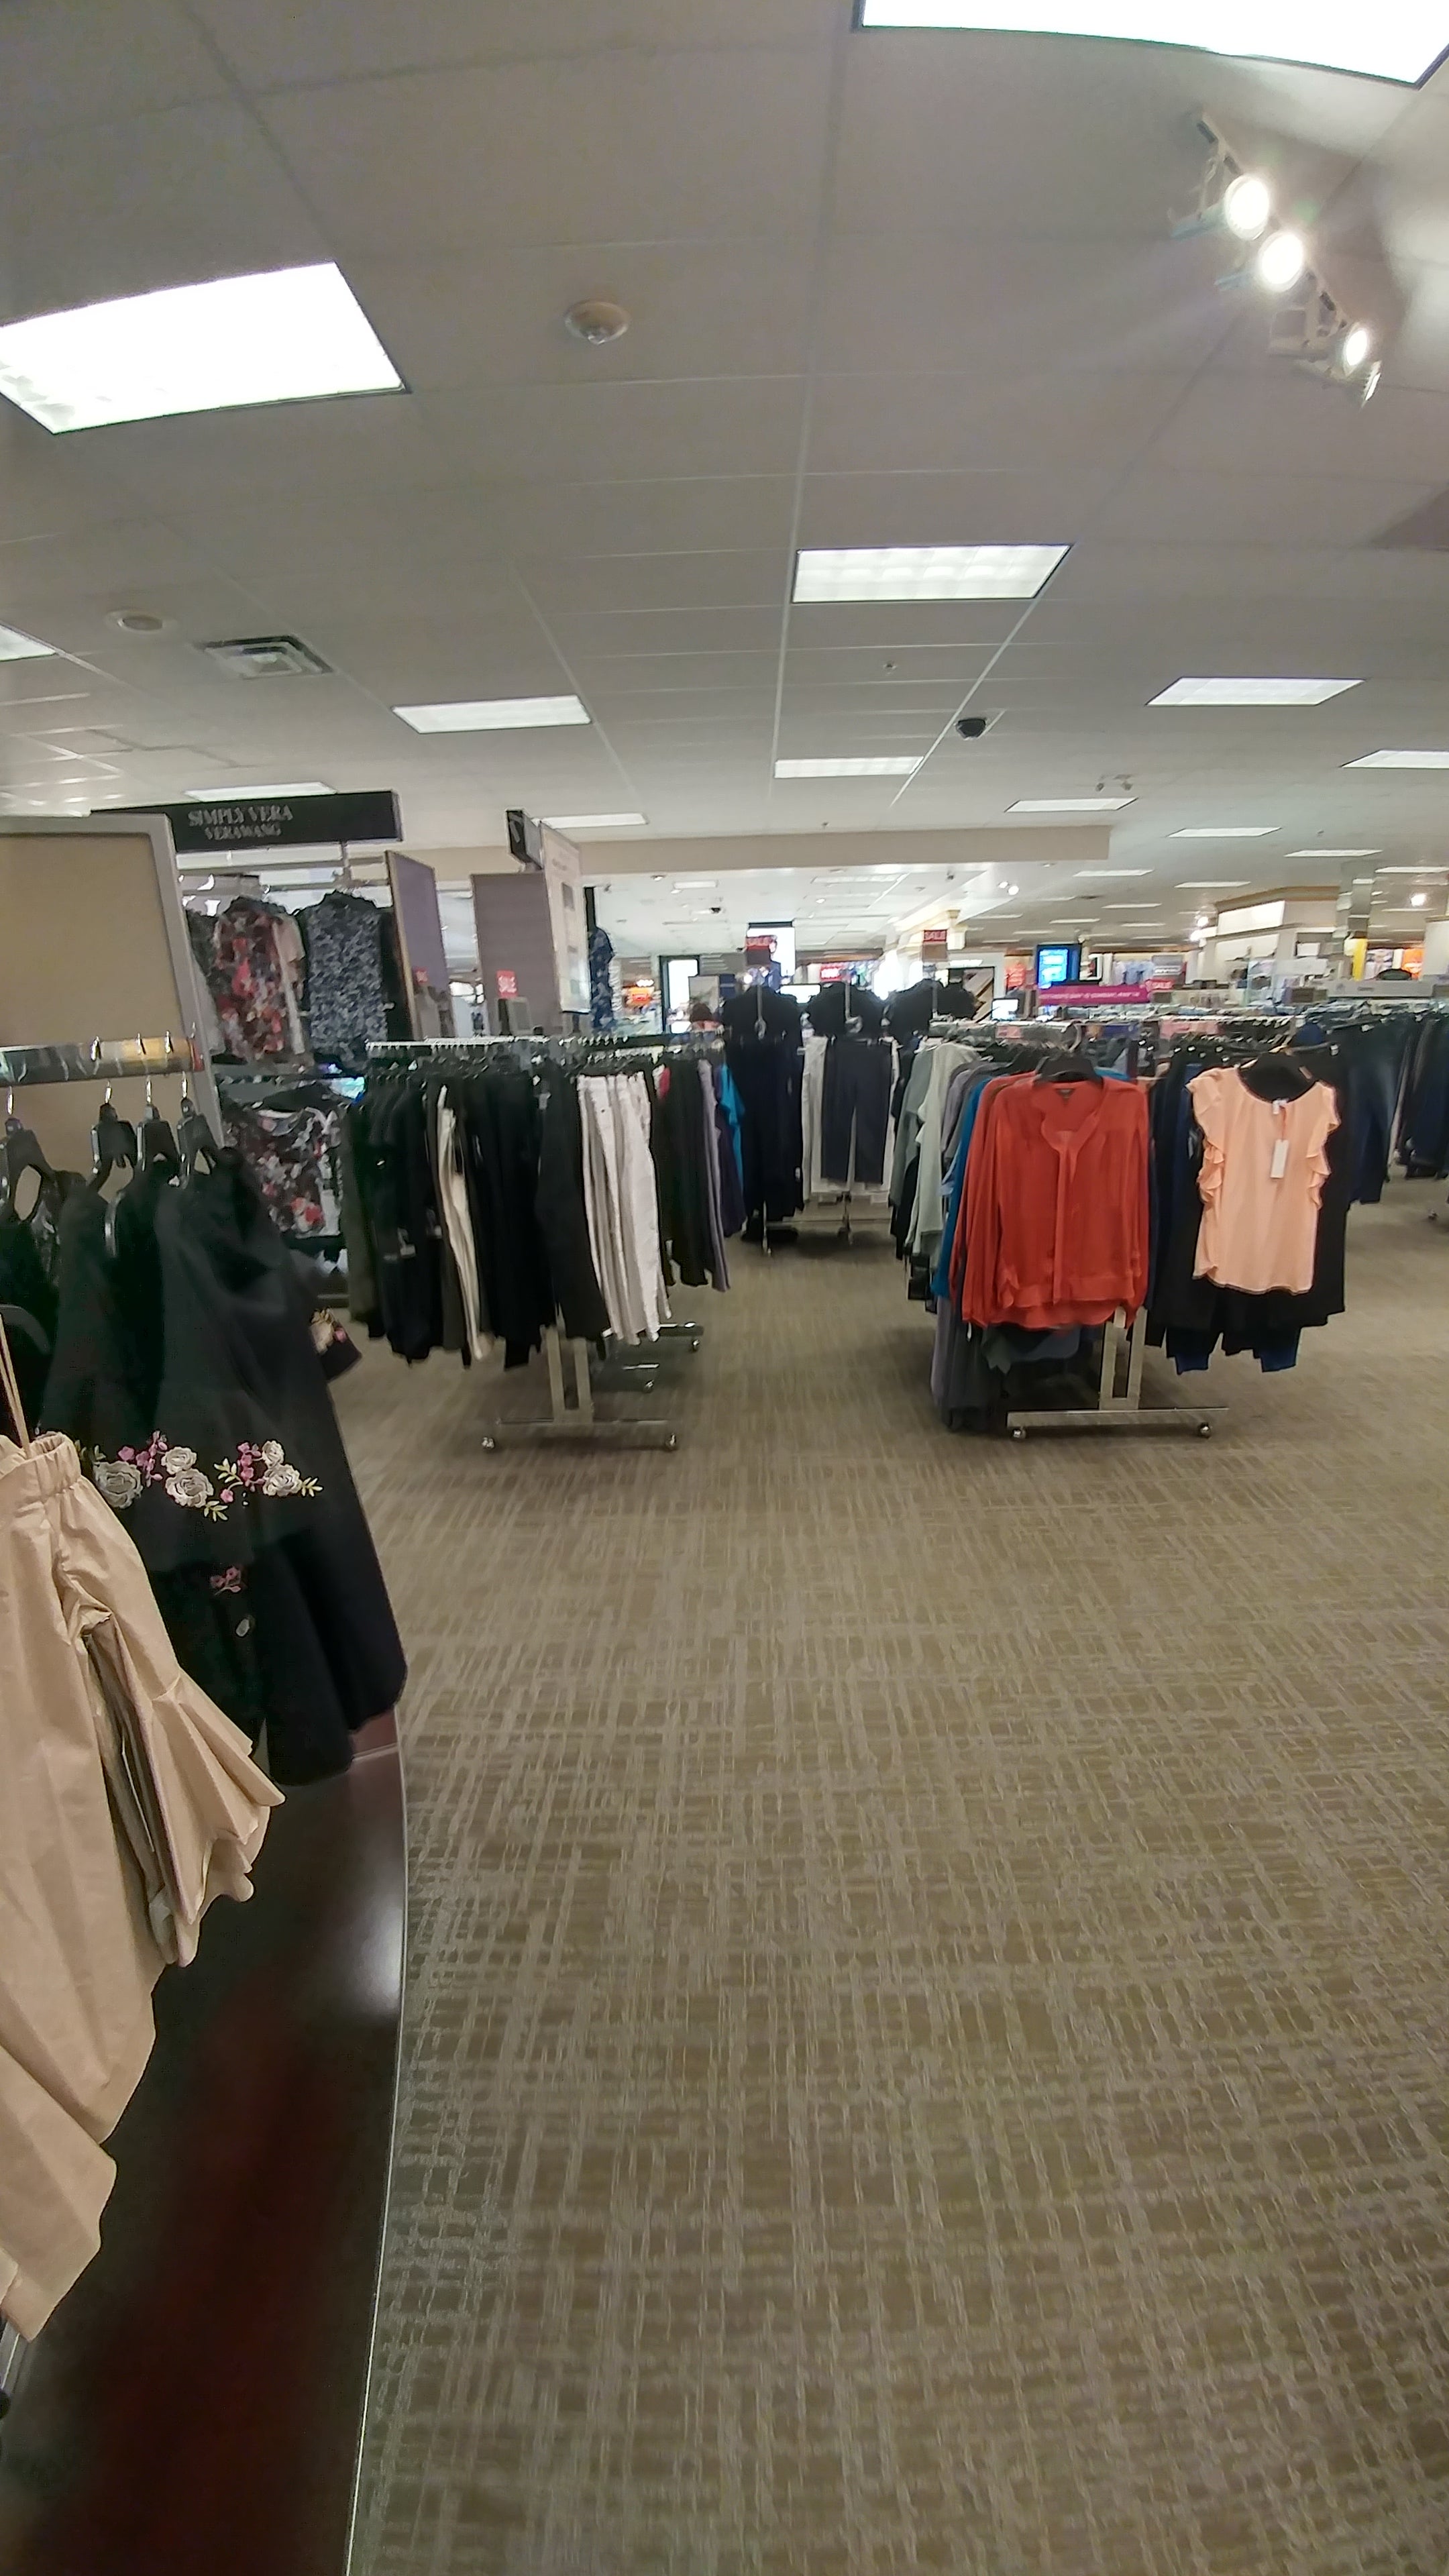 Kohl's, 15680 W 64th Ave, Arvada, CO, Department Stores - MapQuest